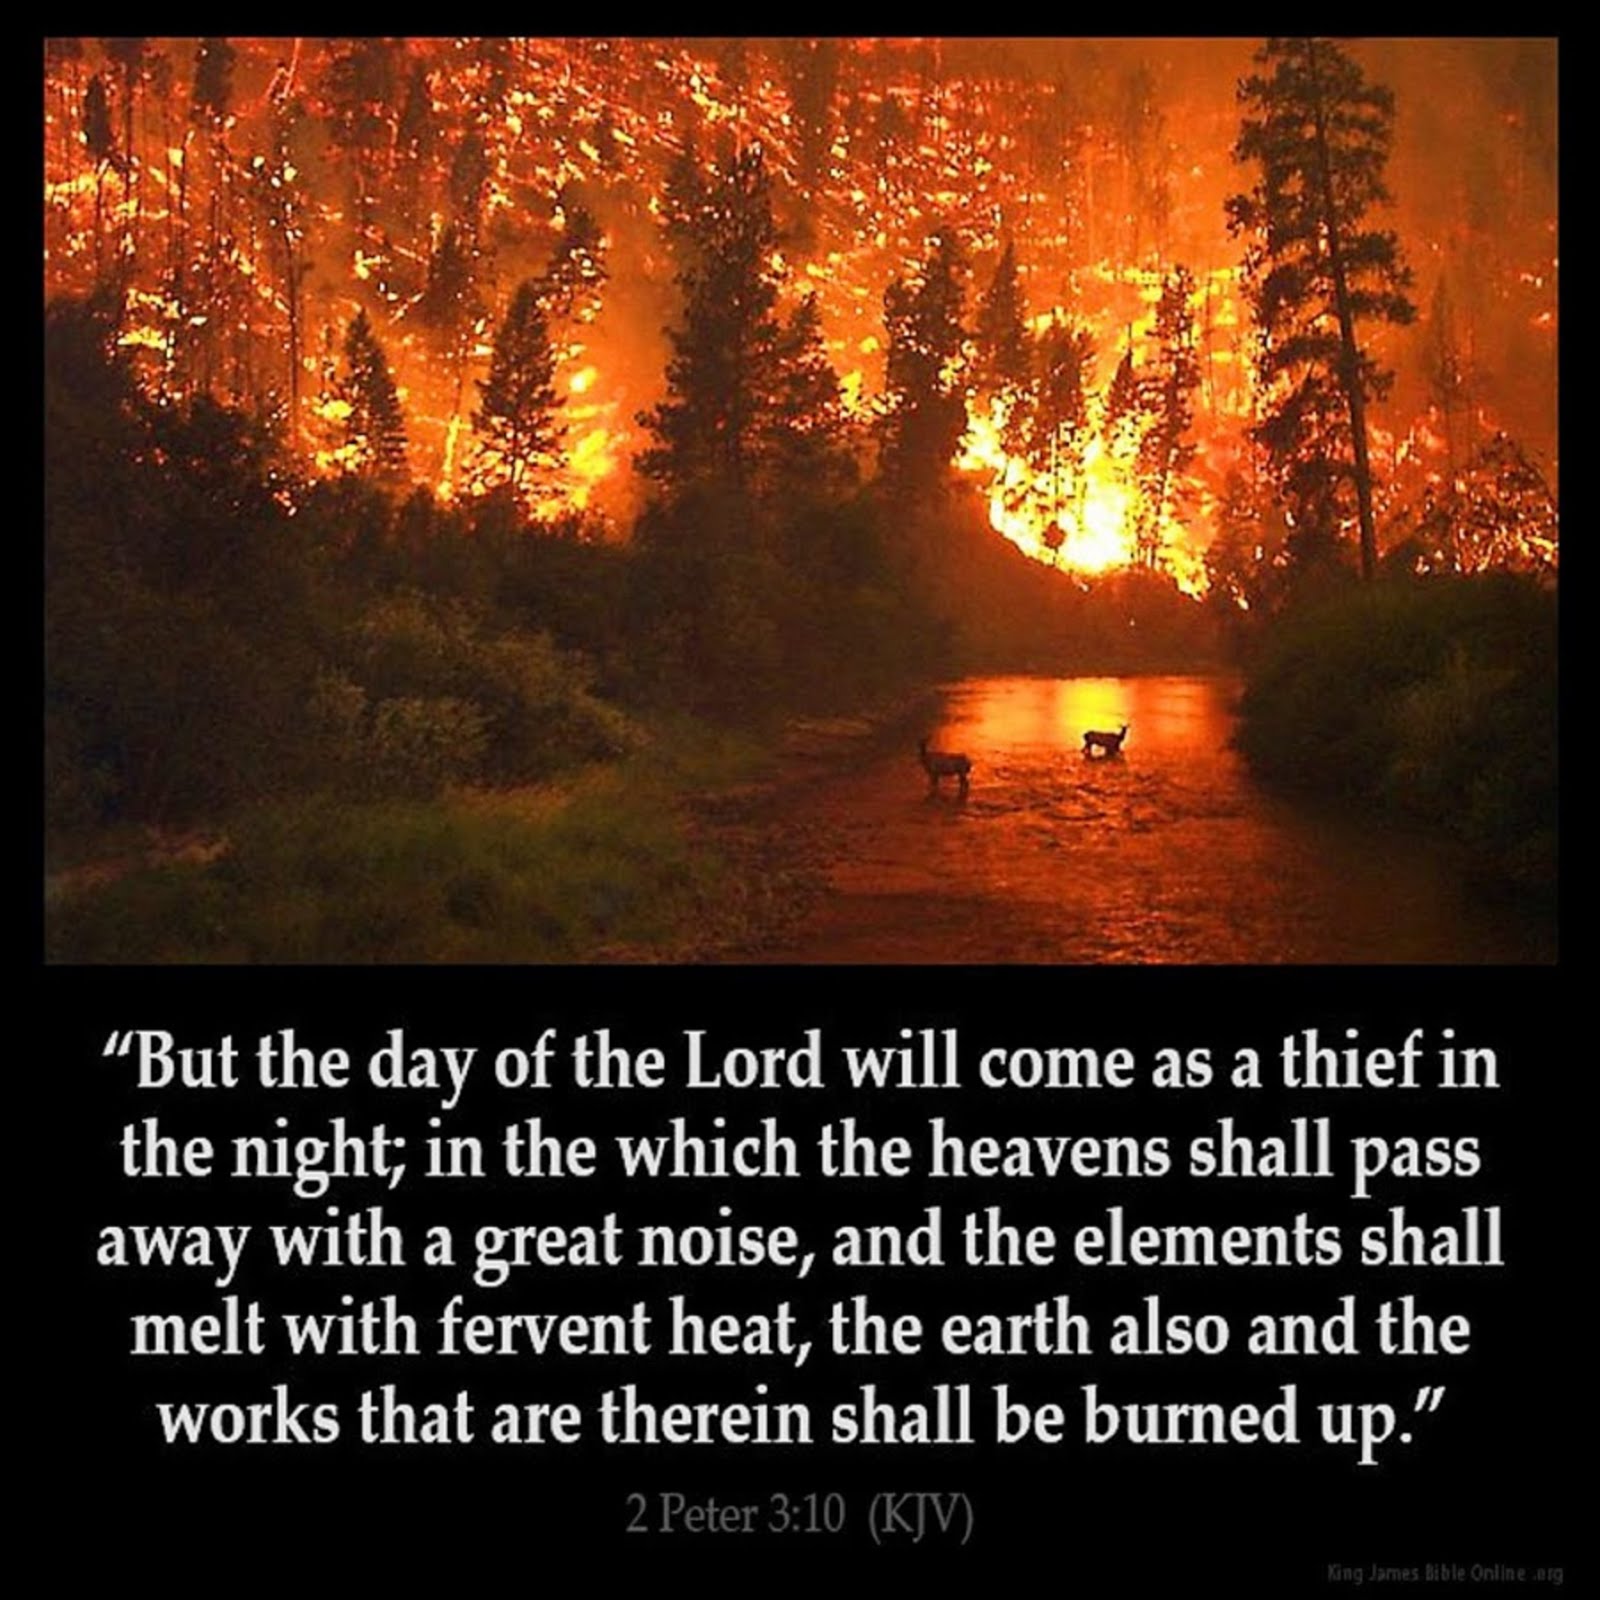 DAY OF THE LORD  - GOD DESTROYS THE EARTH BY FIRE